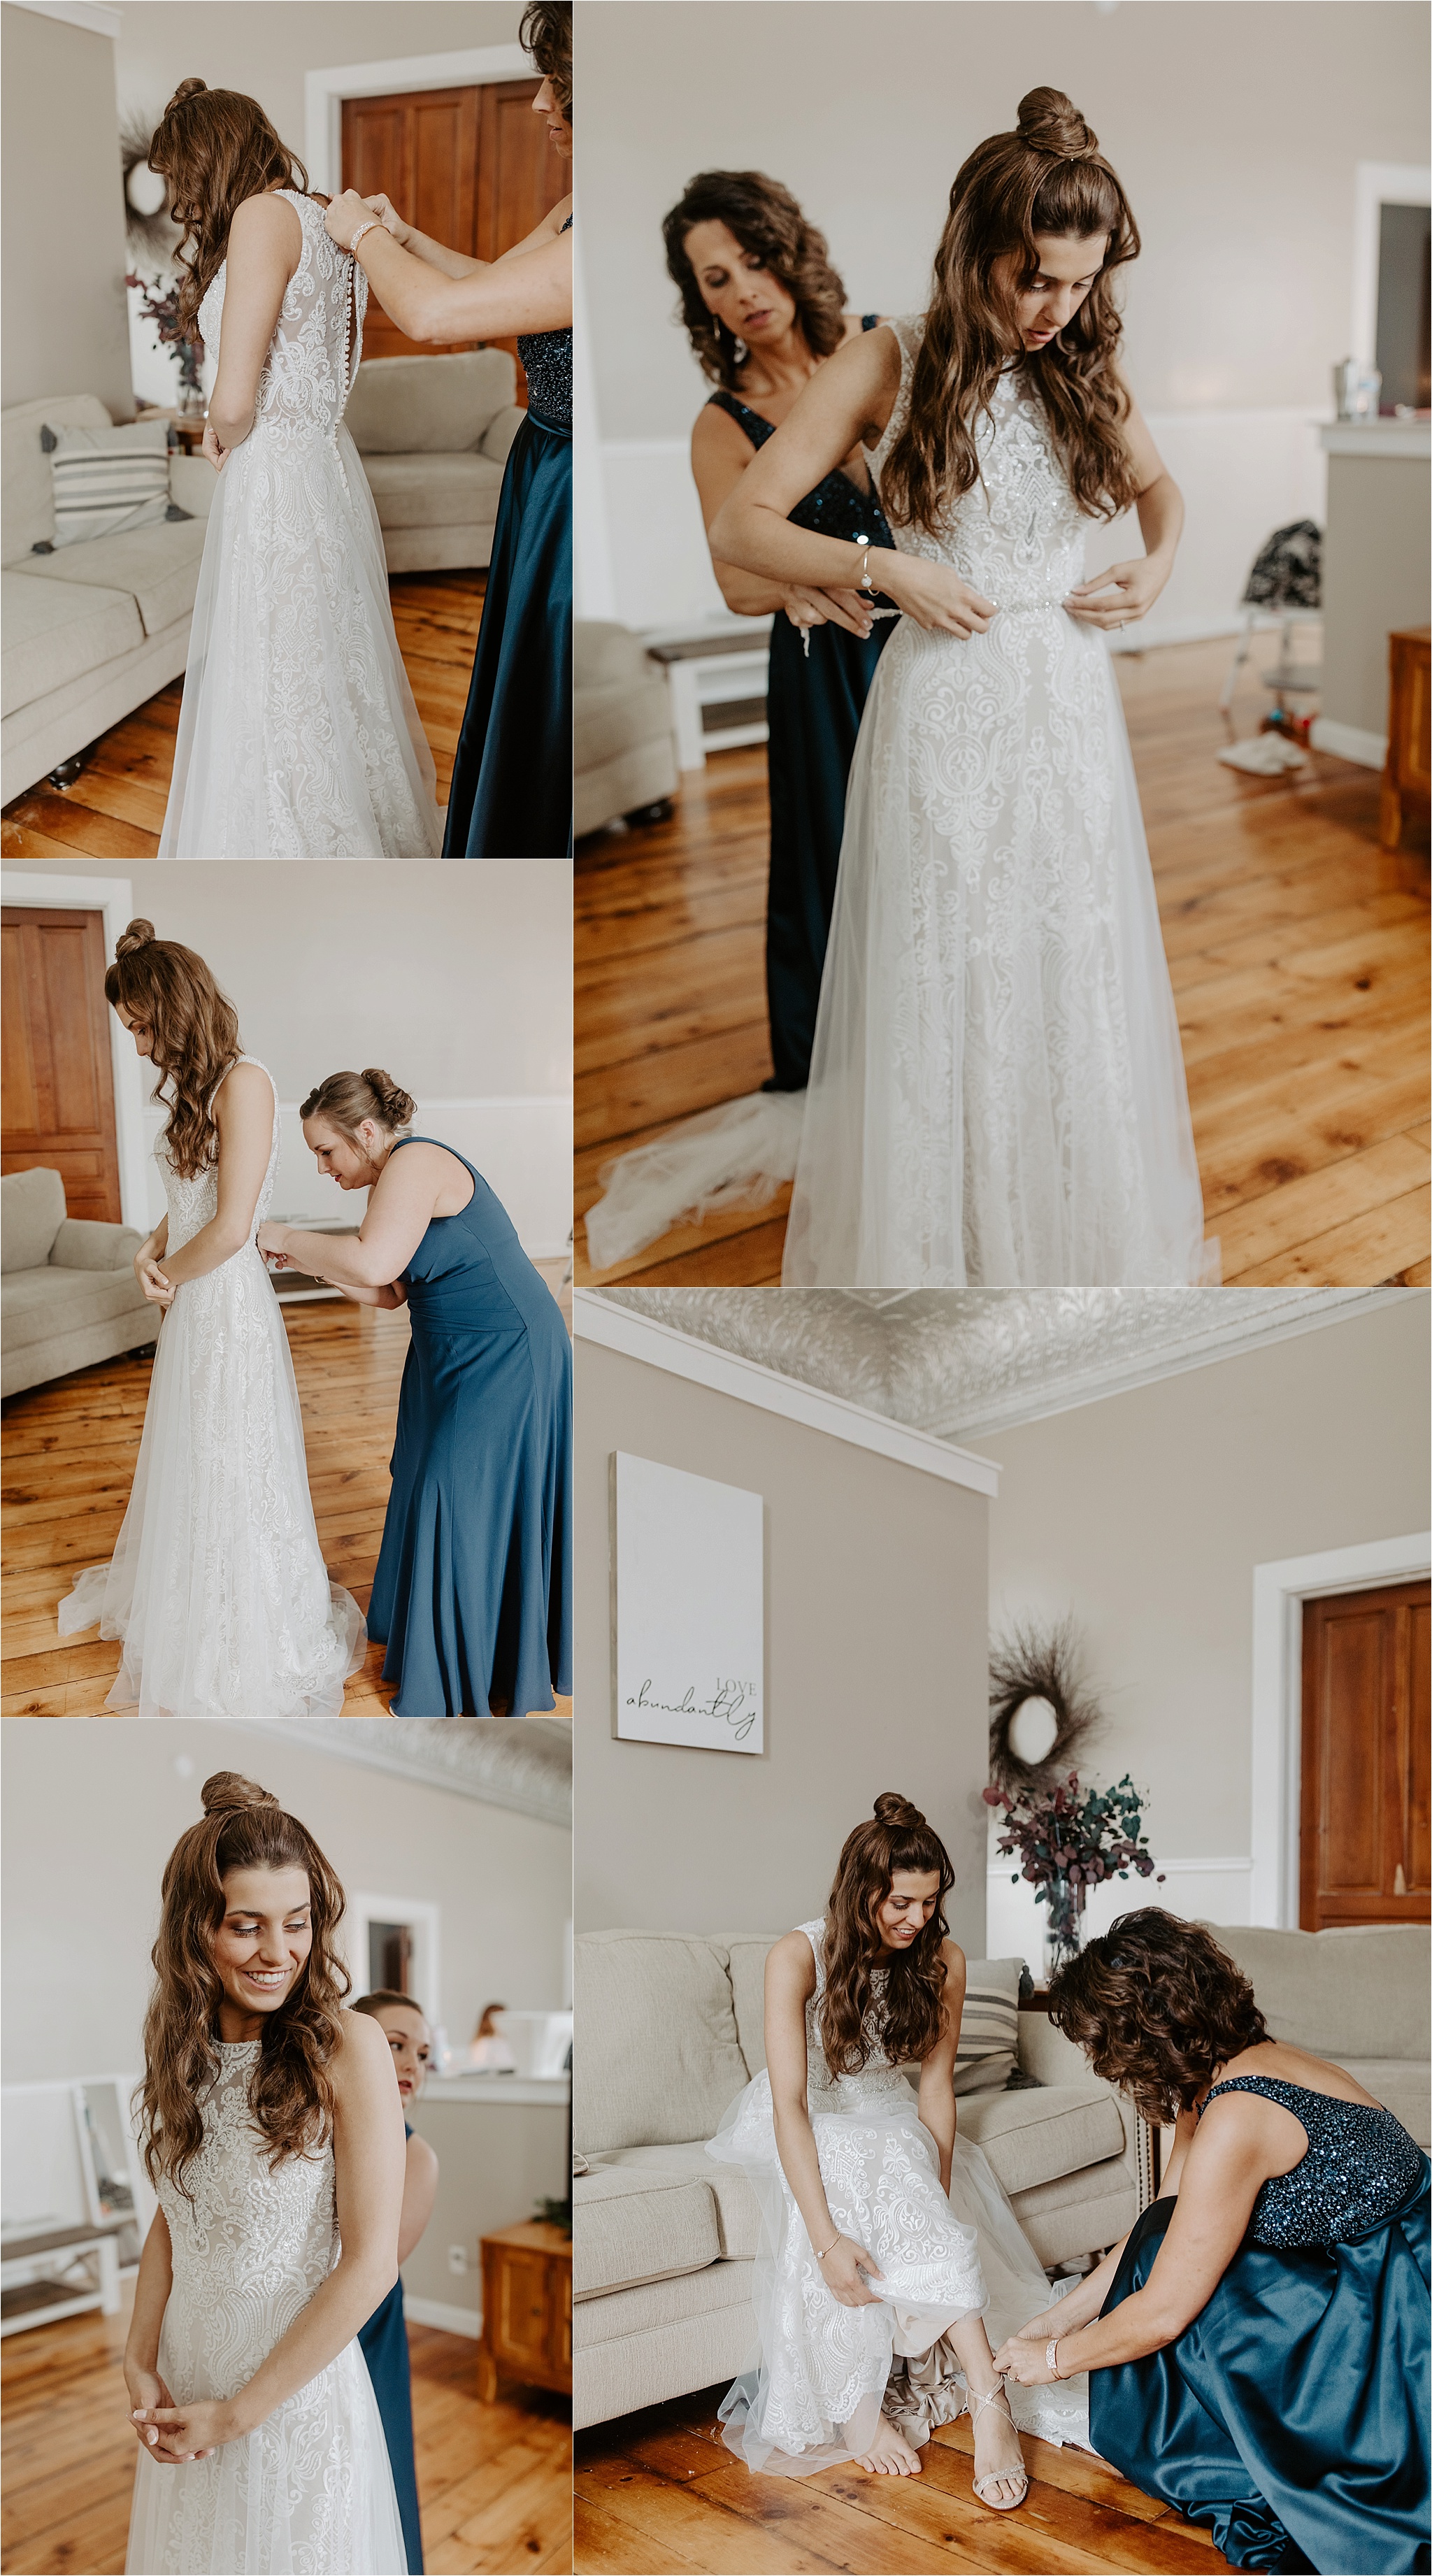 Bride Getting Ready at Town & Country Events Wedding Day in Milford, IL. Krystal Richmond Photography